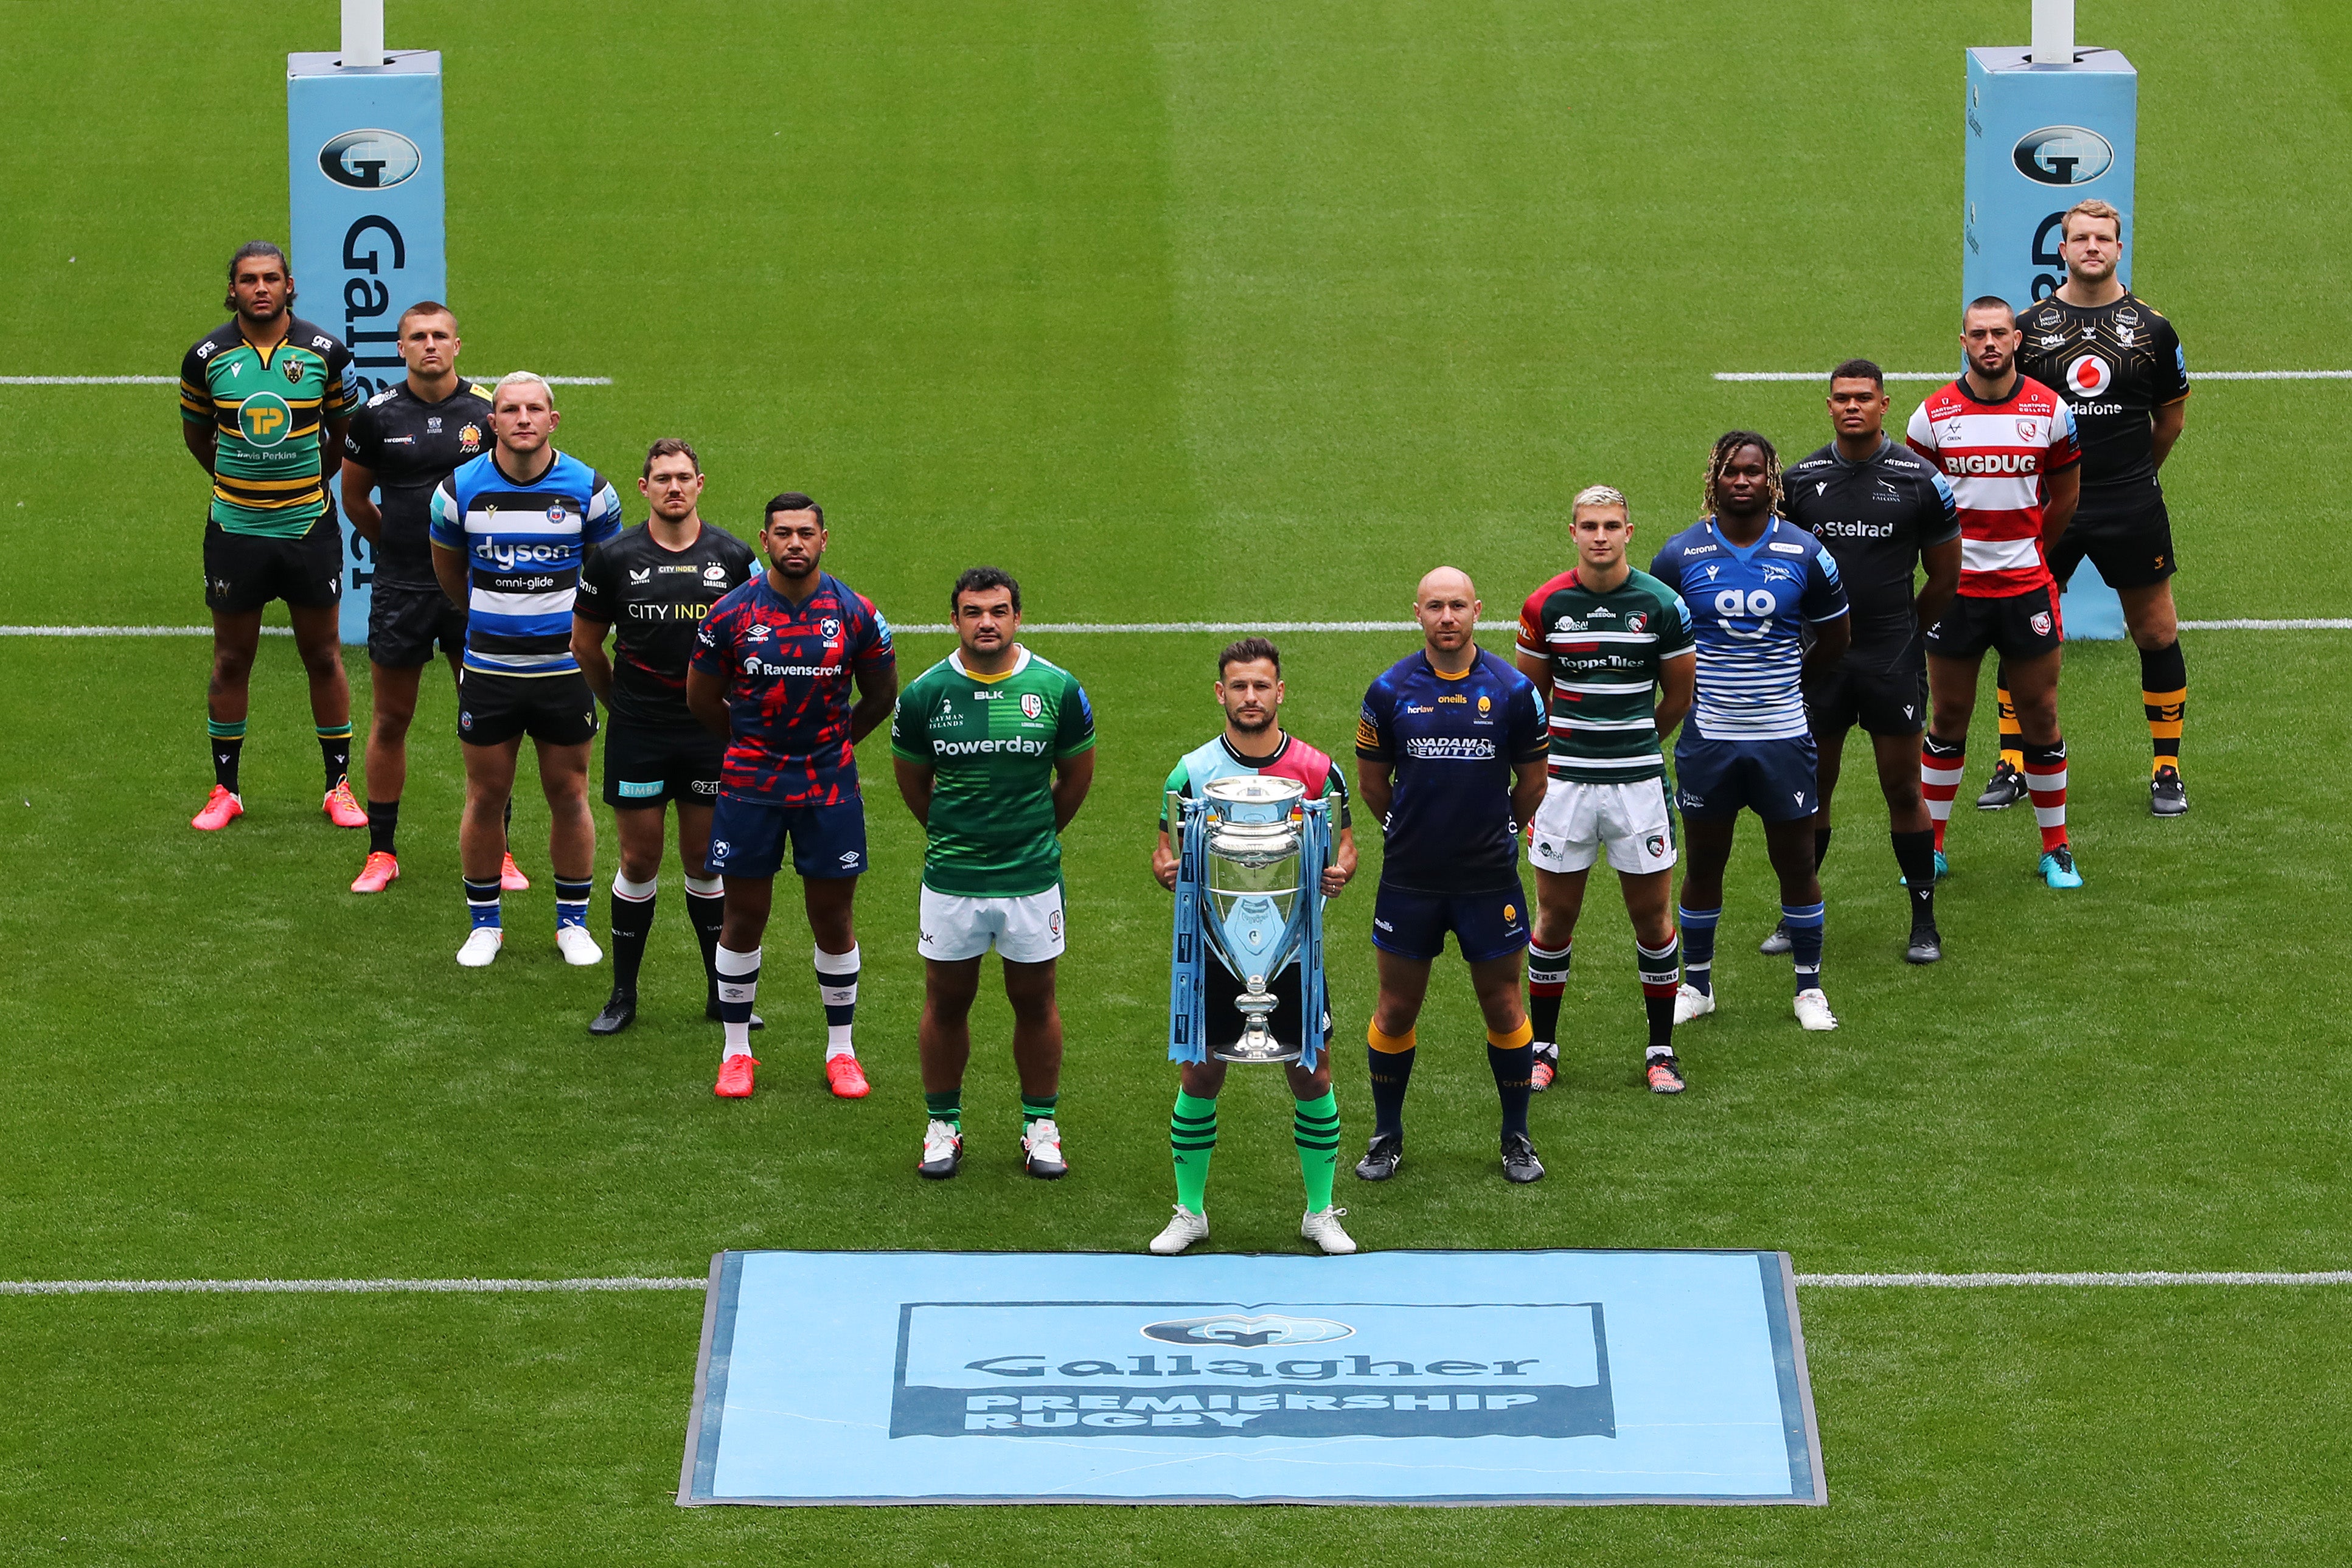 The Gallagher Premiership will have 13 teams competing this season